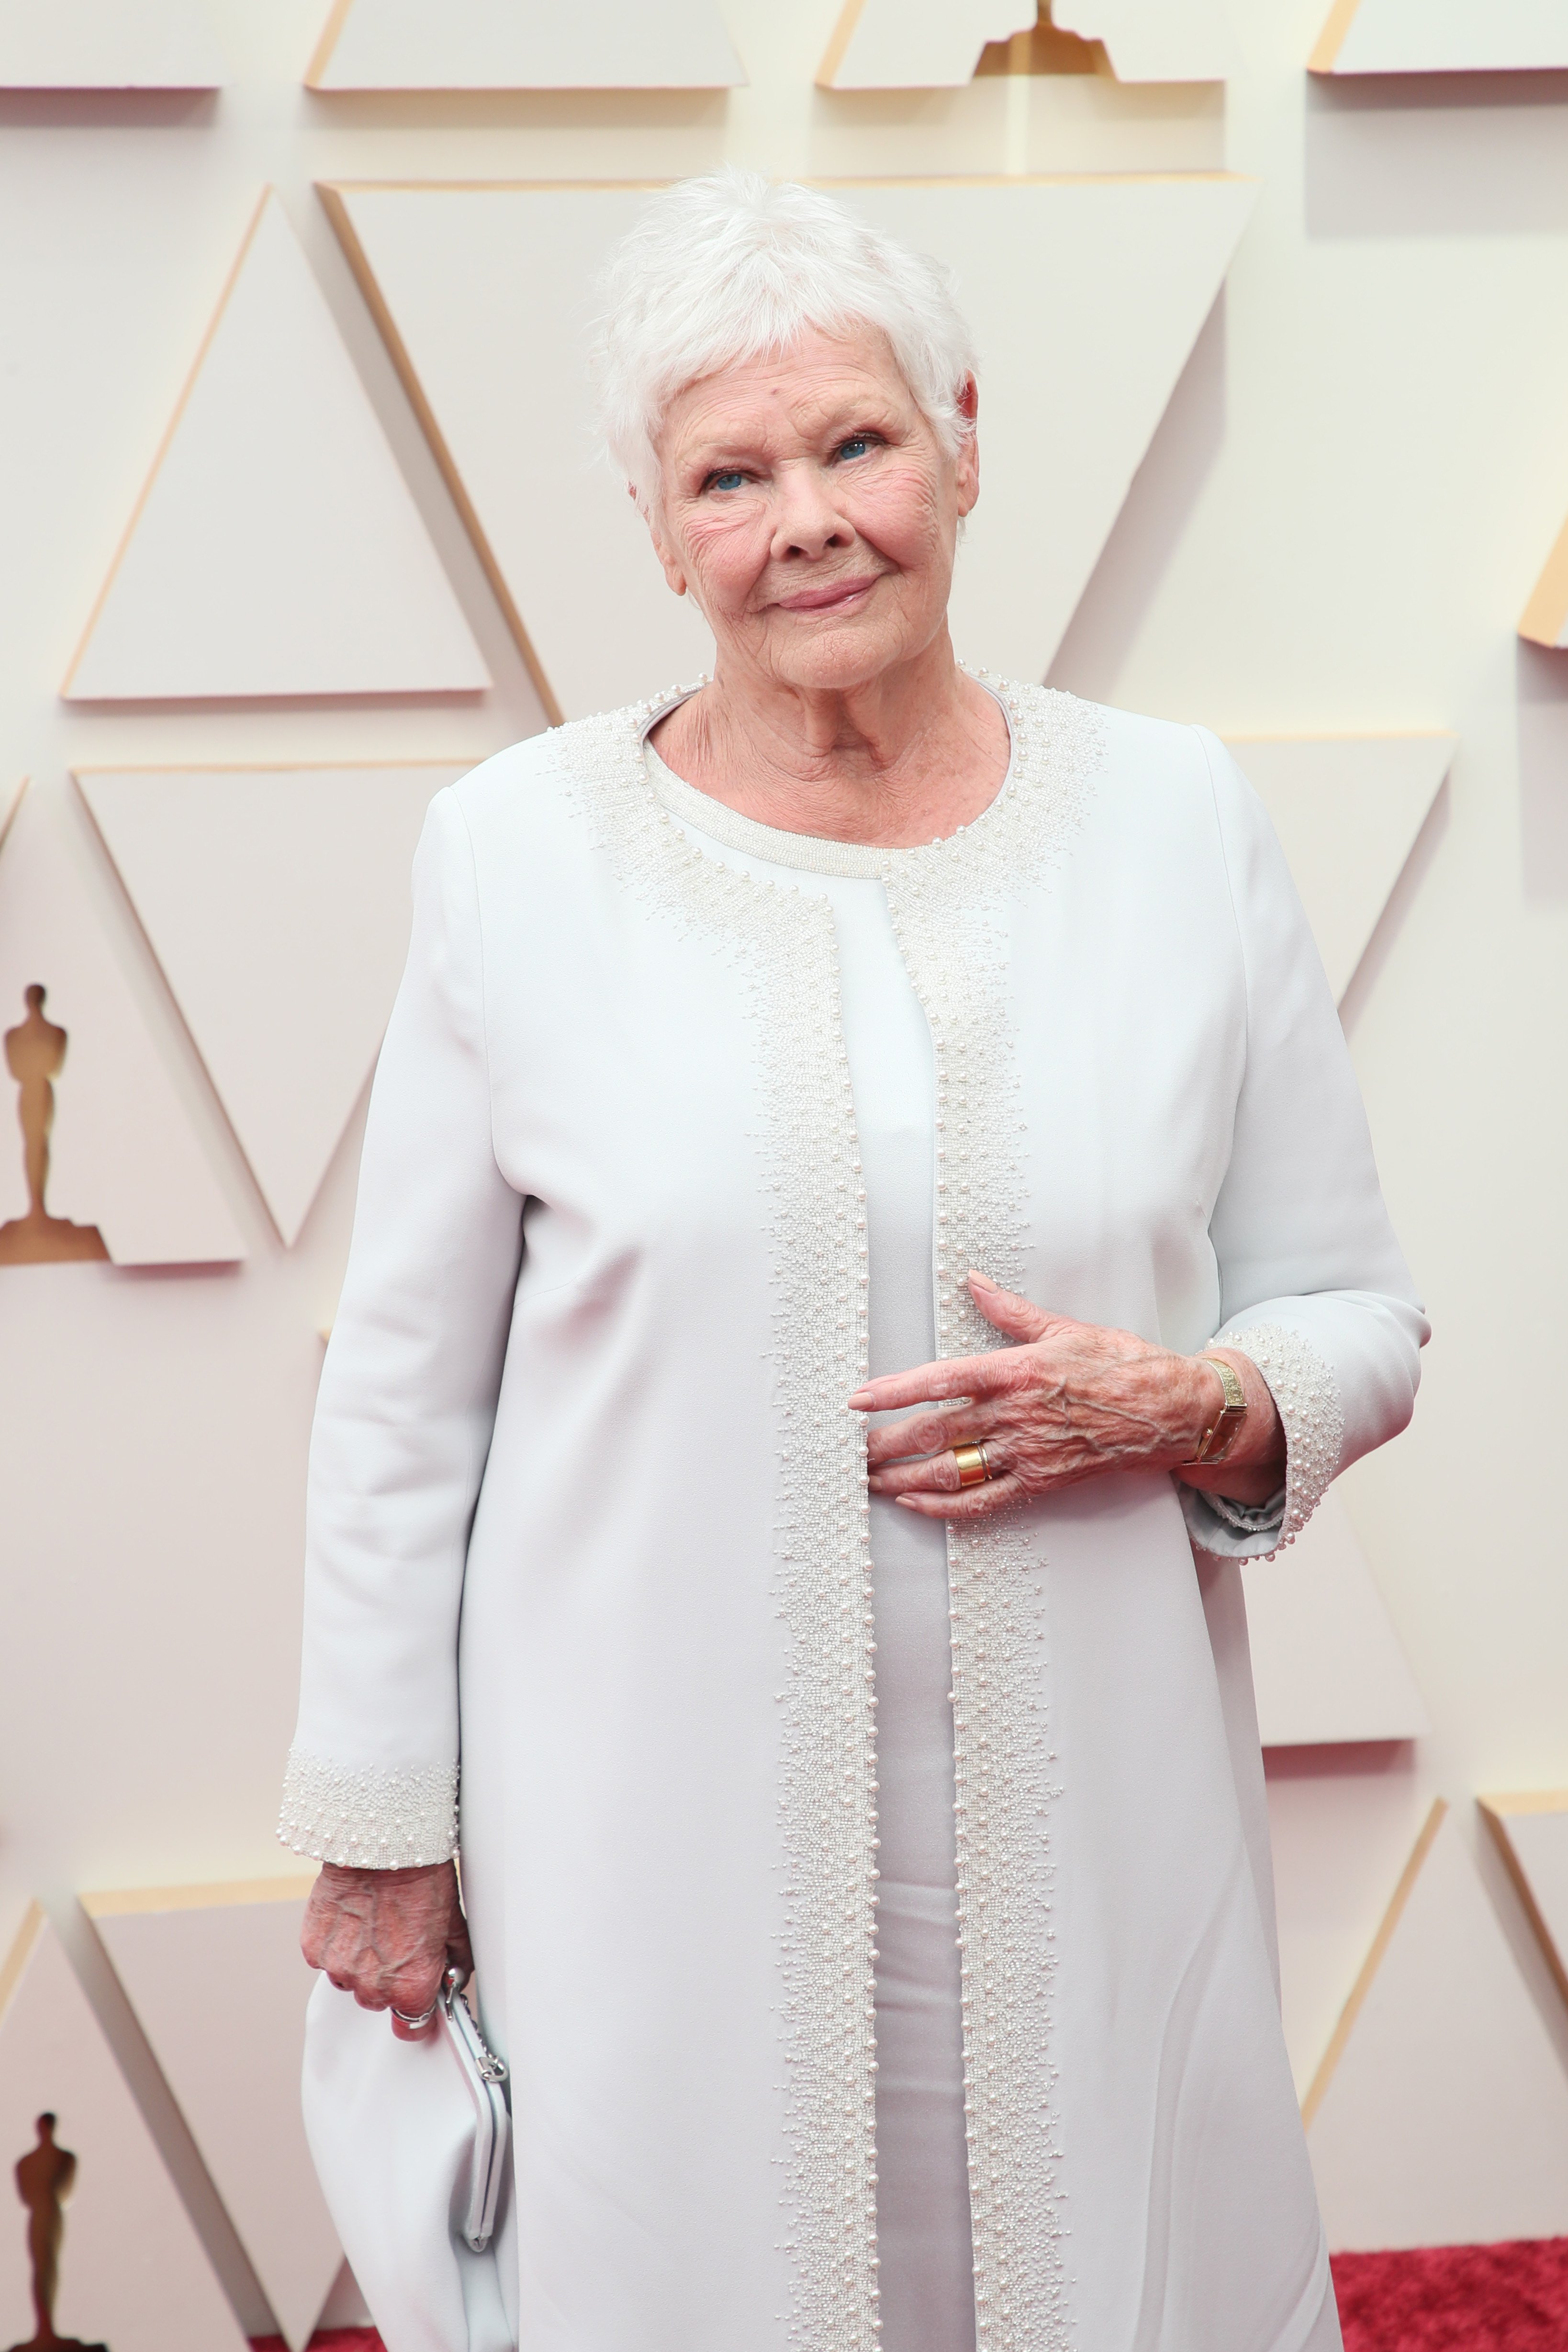 Judi Dench at Hollywood and Highland on March 27, 2022, in Hollywood, California. | Source: Getty Images